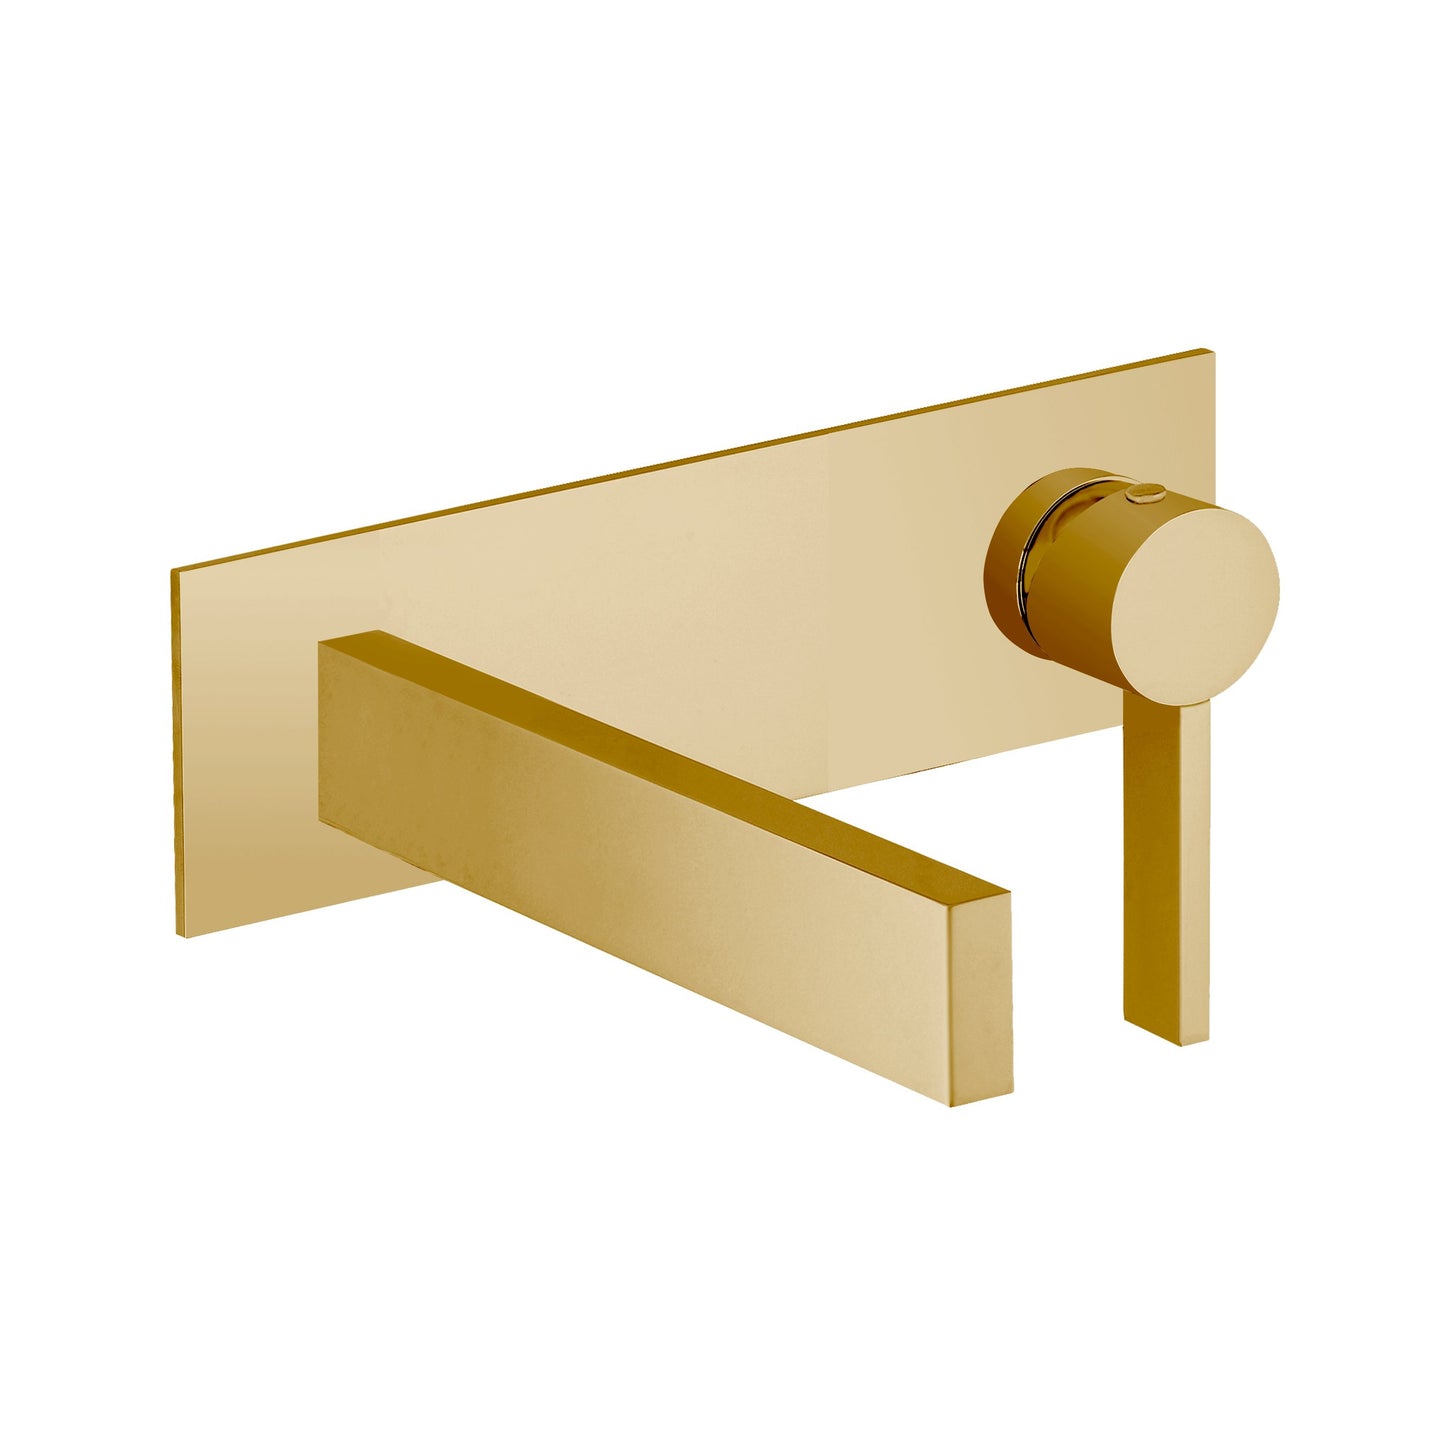 Aquadesign Products Wall Mount Basin – Drain Not Included (Caso 500021) - Brushed Gold